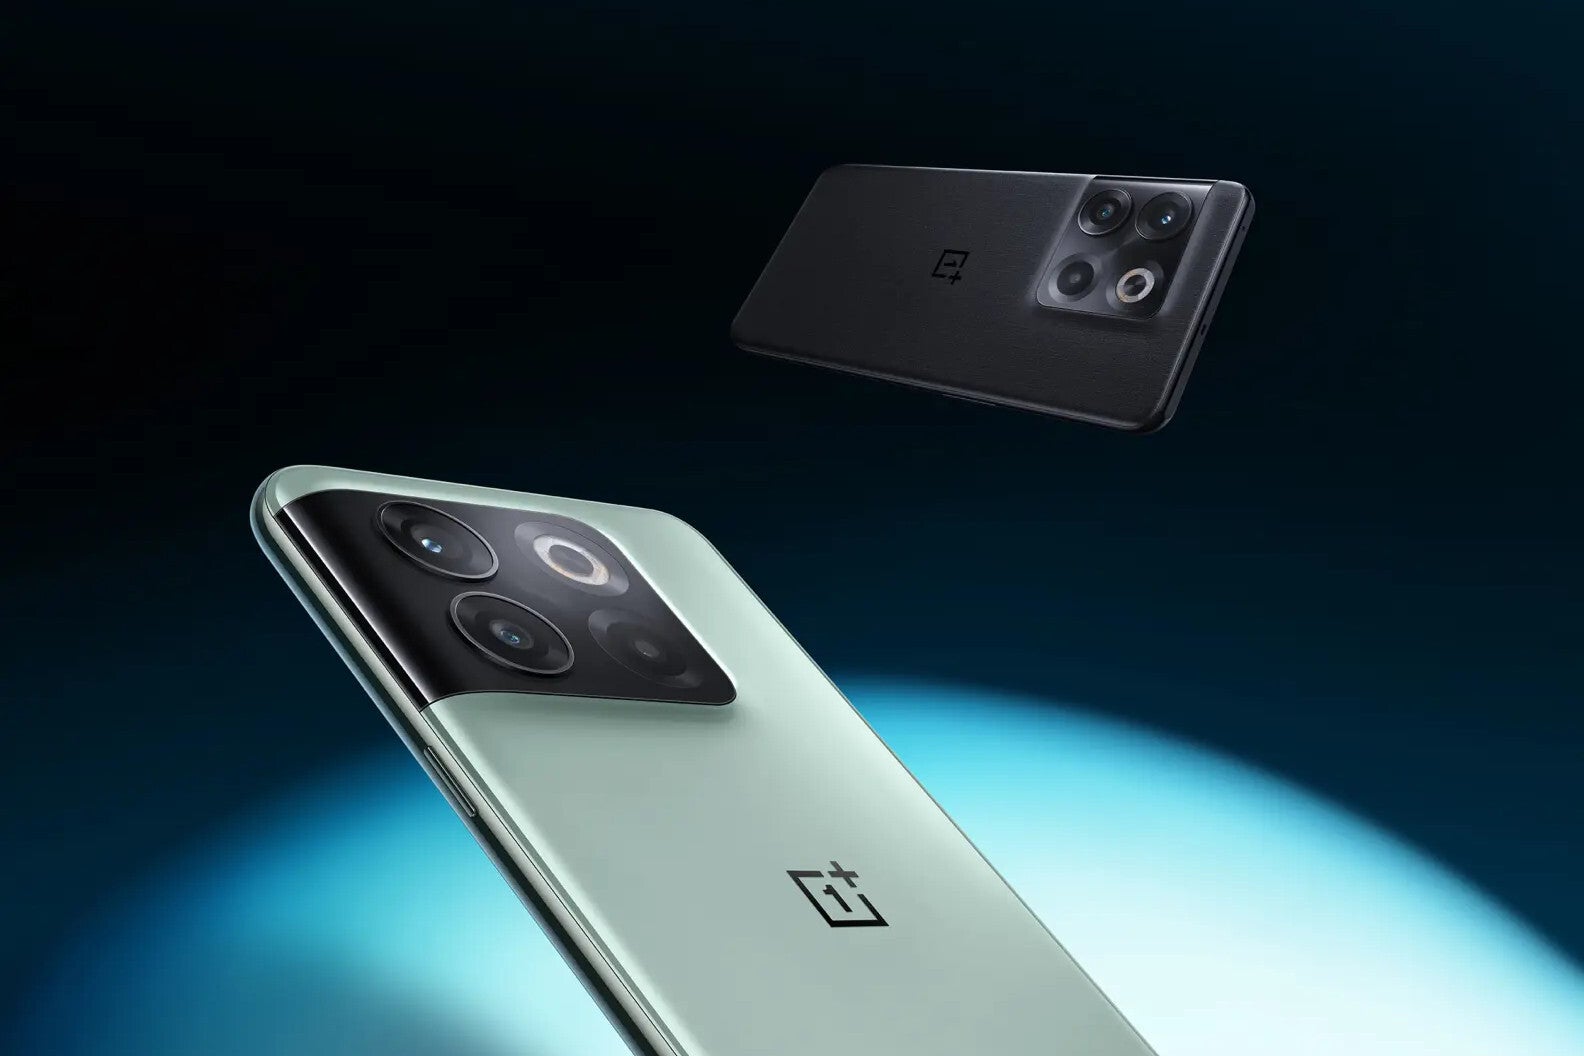 OnePlus 10T will come in Moonstone Black and Jade Green color variants - OnePlus 10T colors: all the official hues